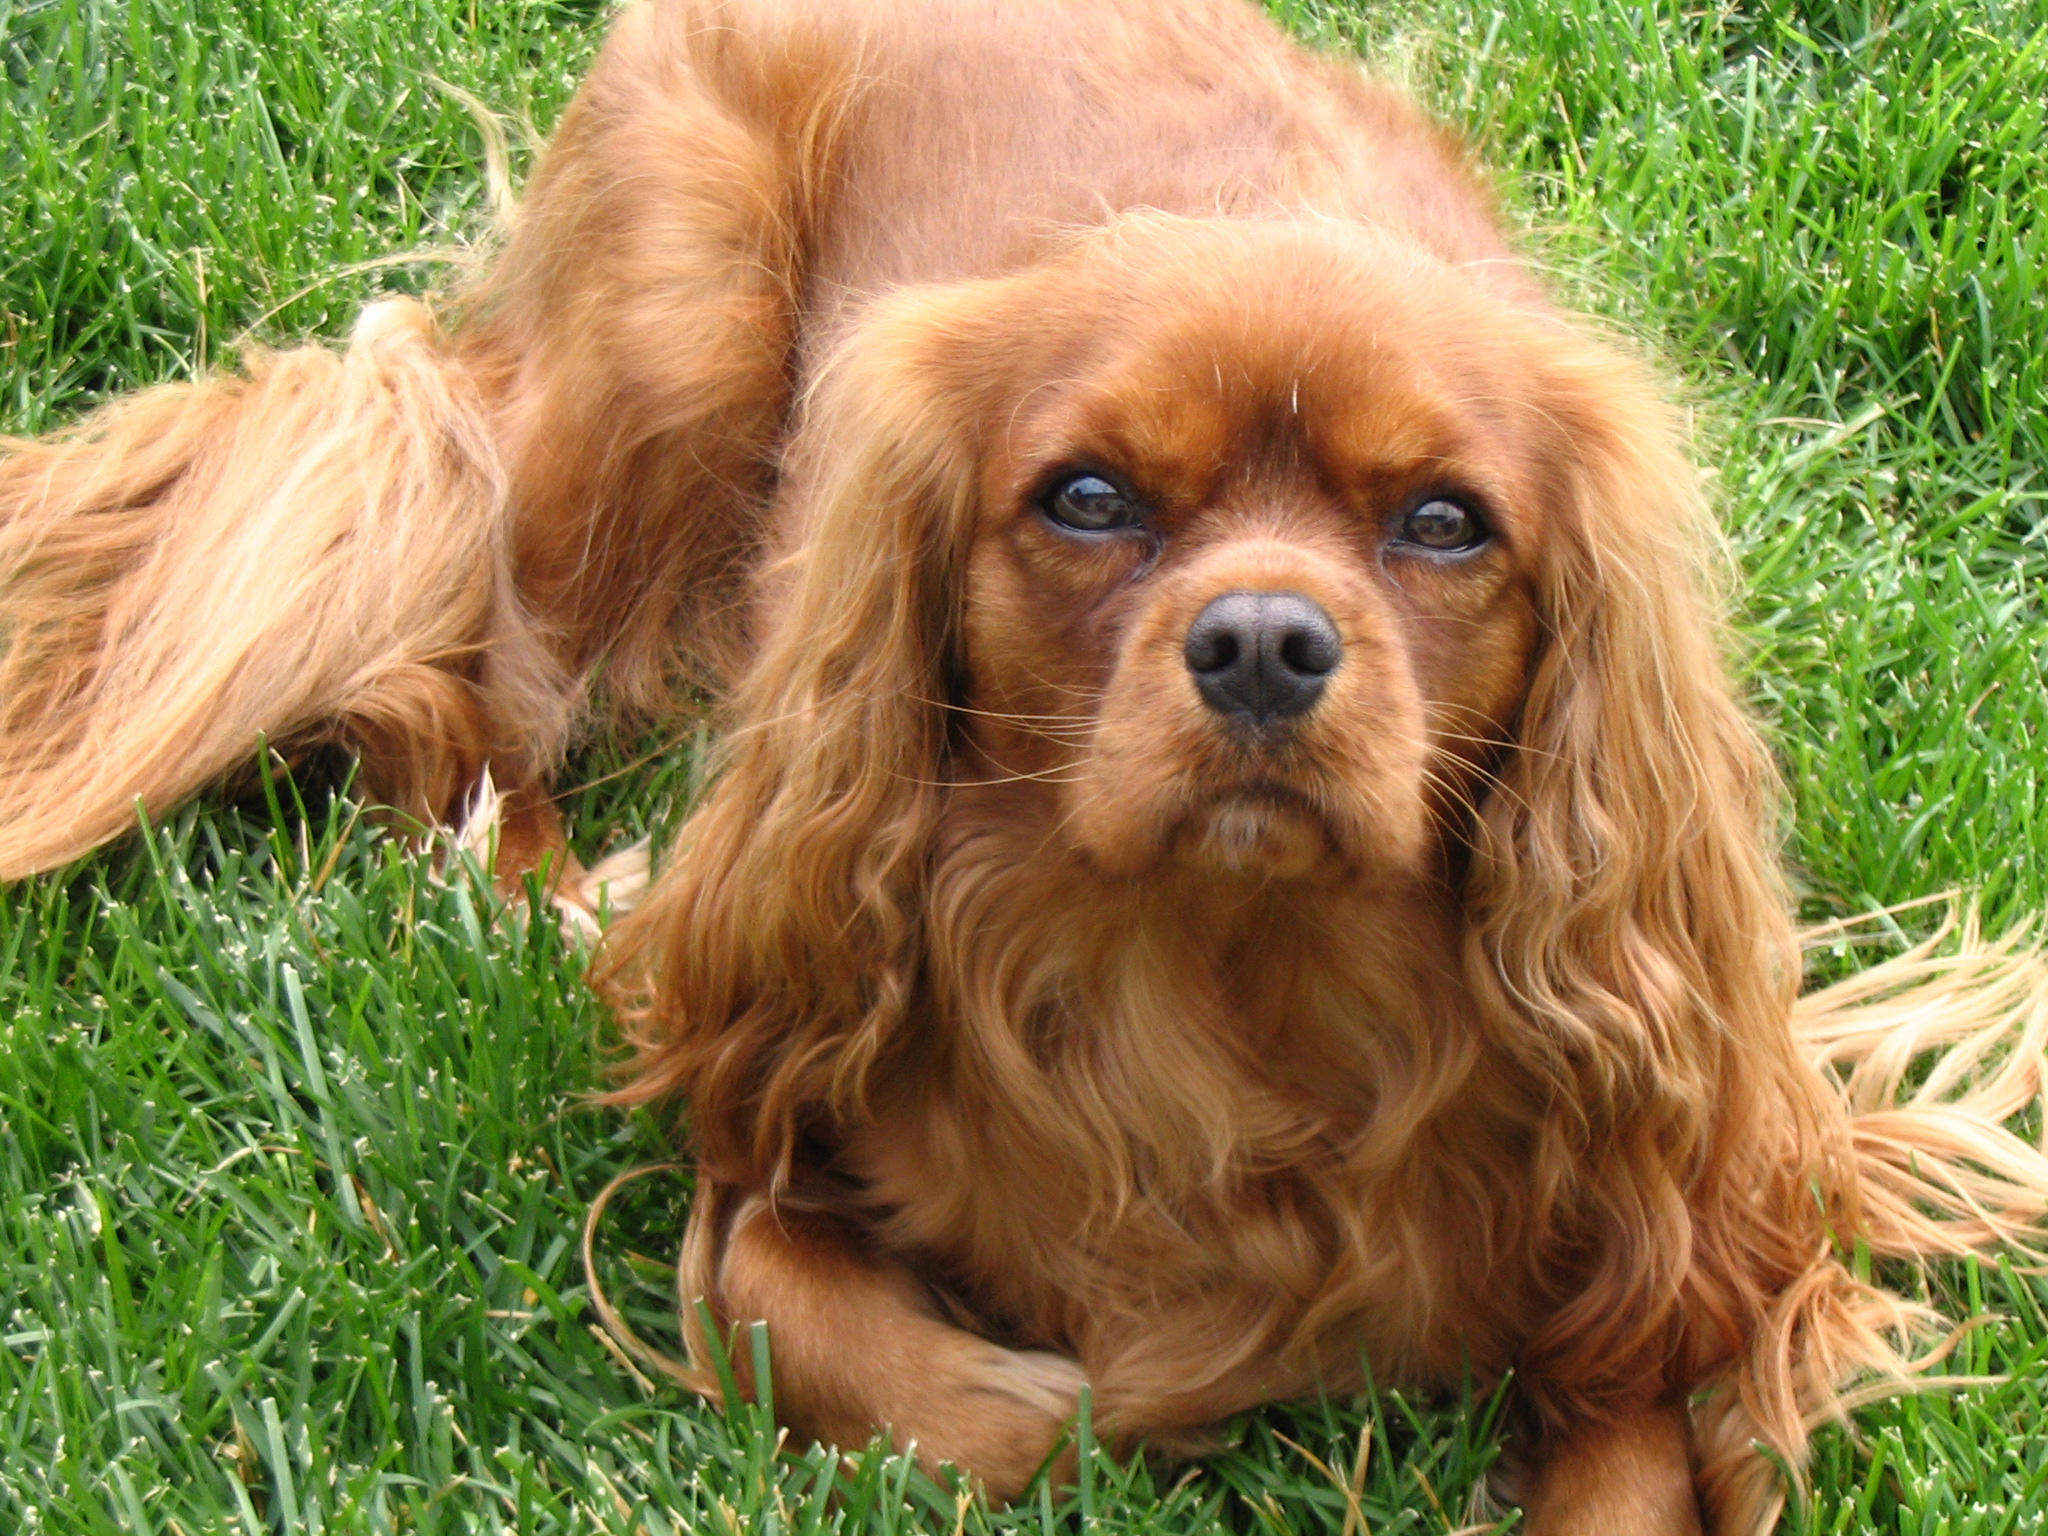 ... Cavalier King Charles Spaniel Ruby Cavaliers are intended to be entirely chestnut in color. Can Rubys have white in their coats? Many do.